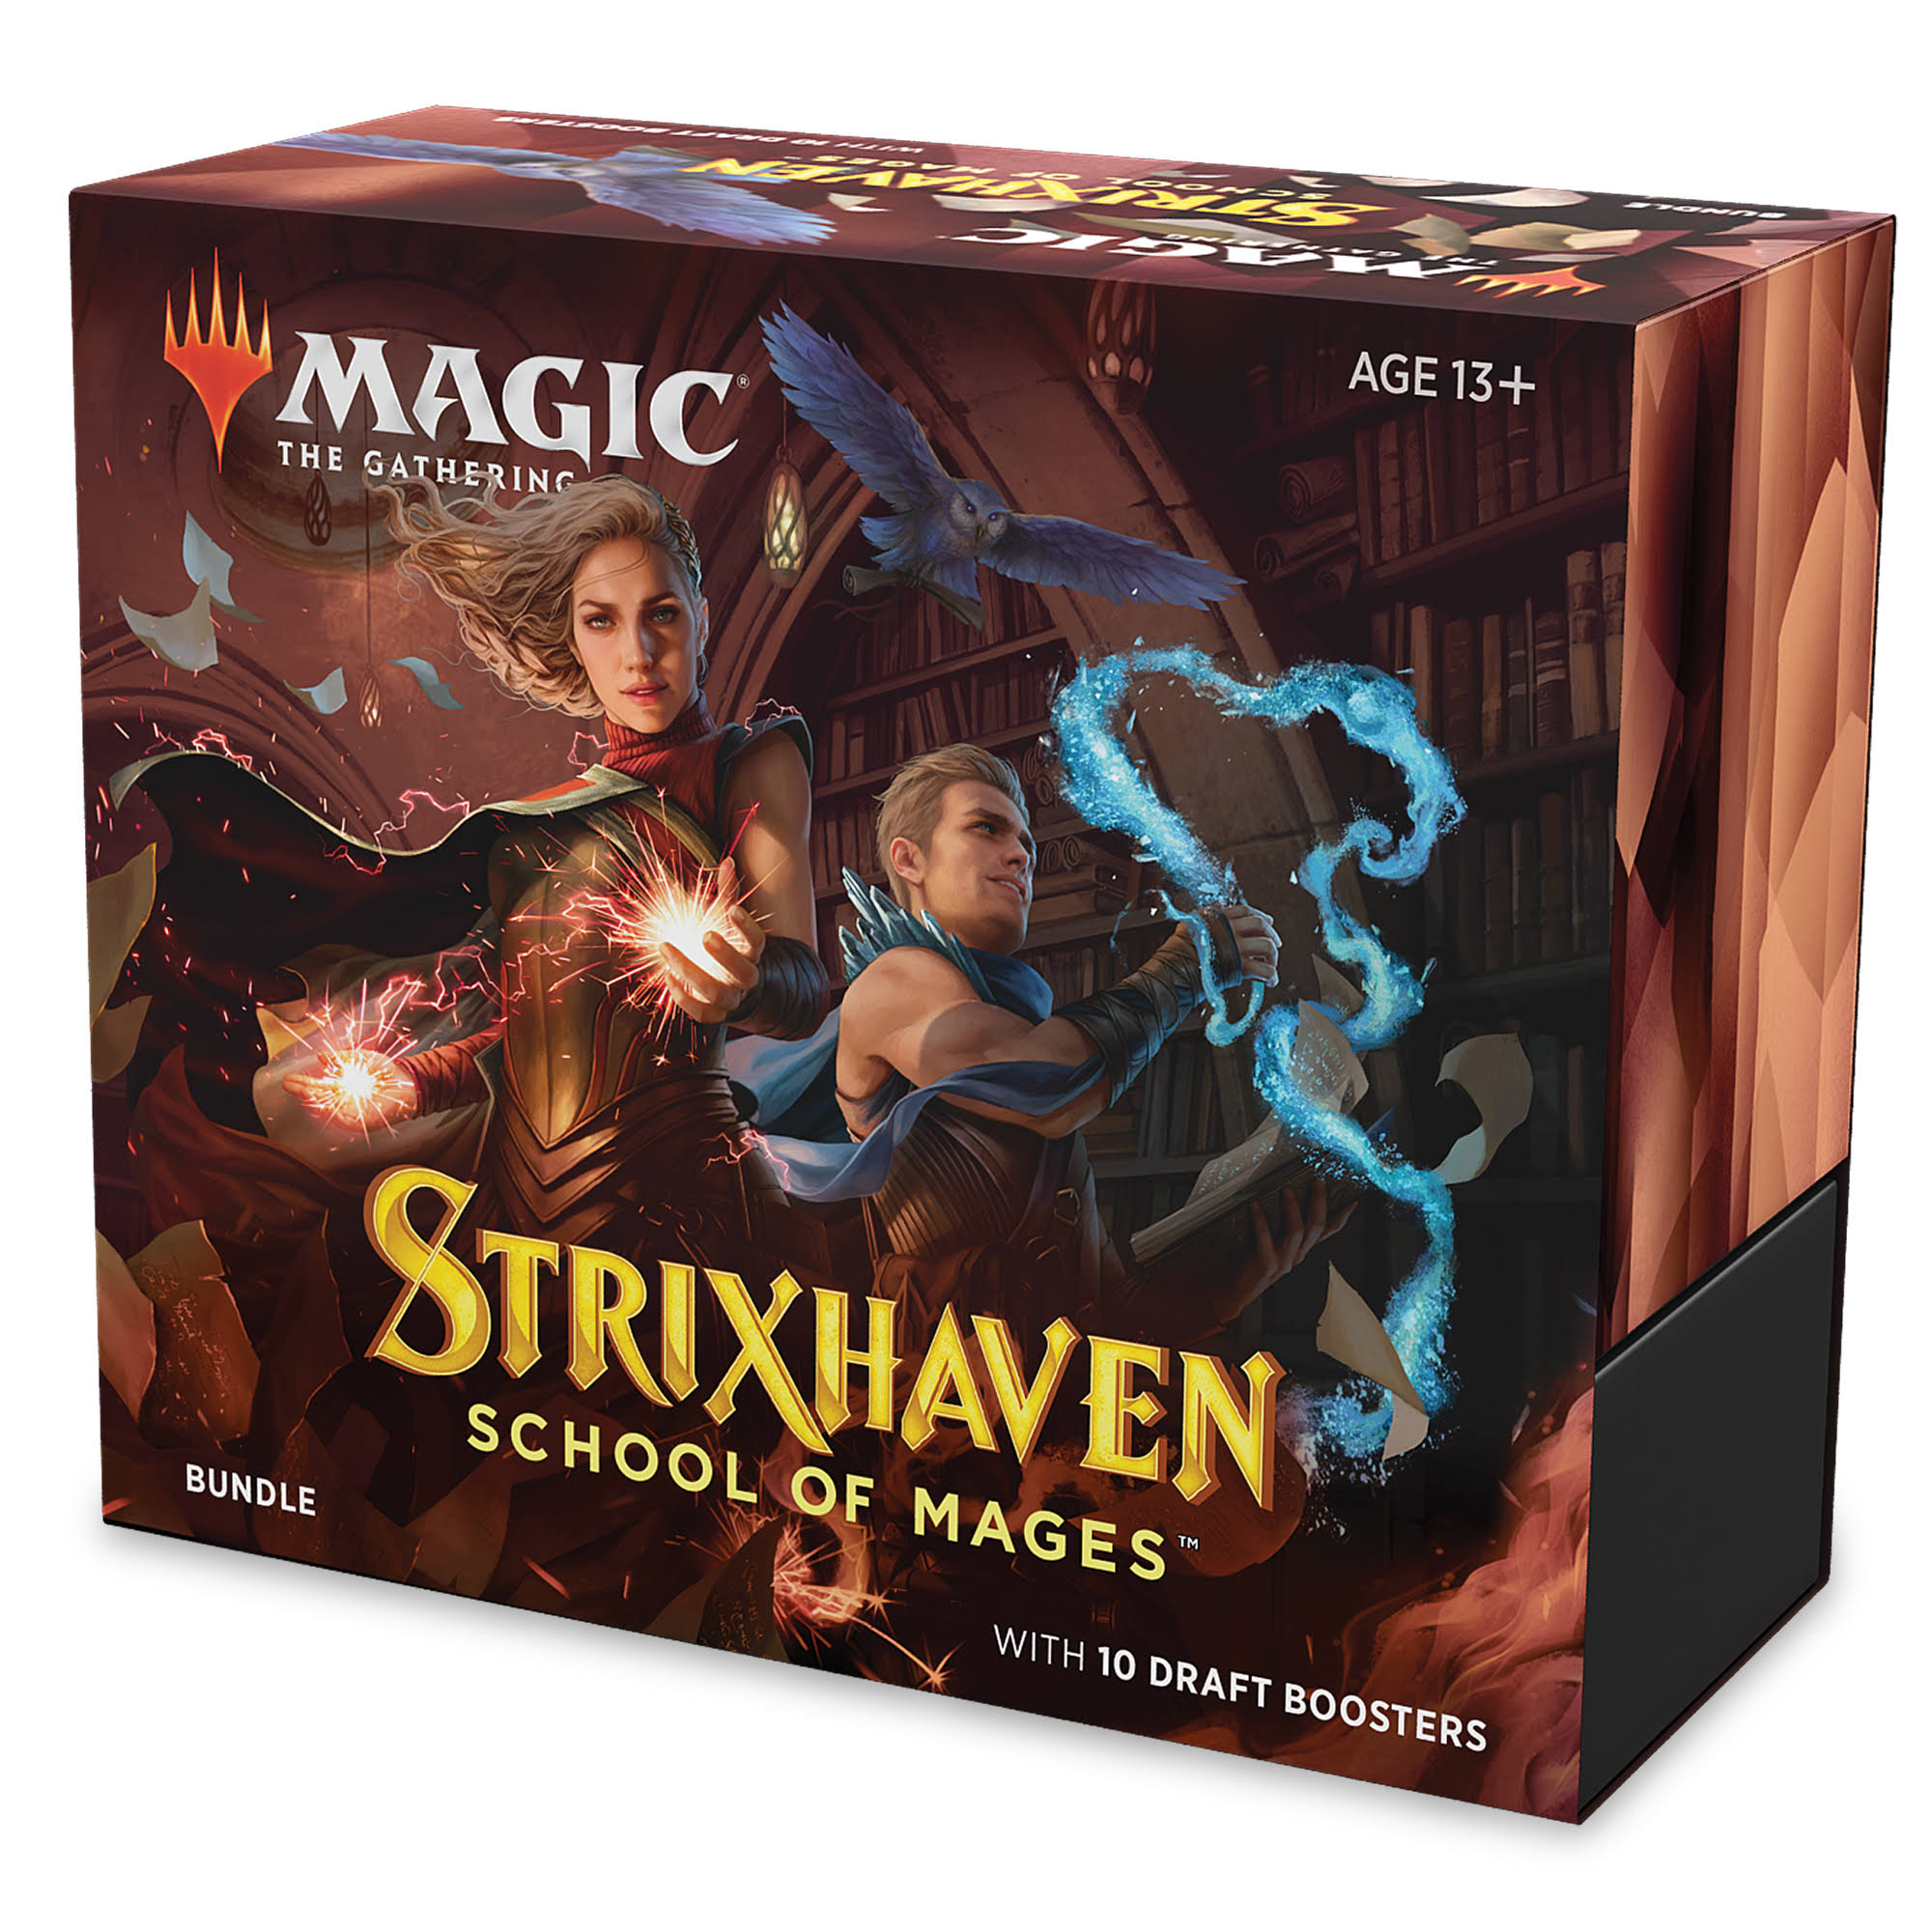 Magic The Gathering - Strixhaven School of Mages Bundle